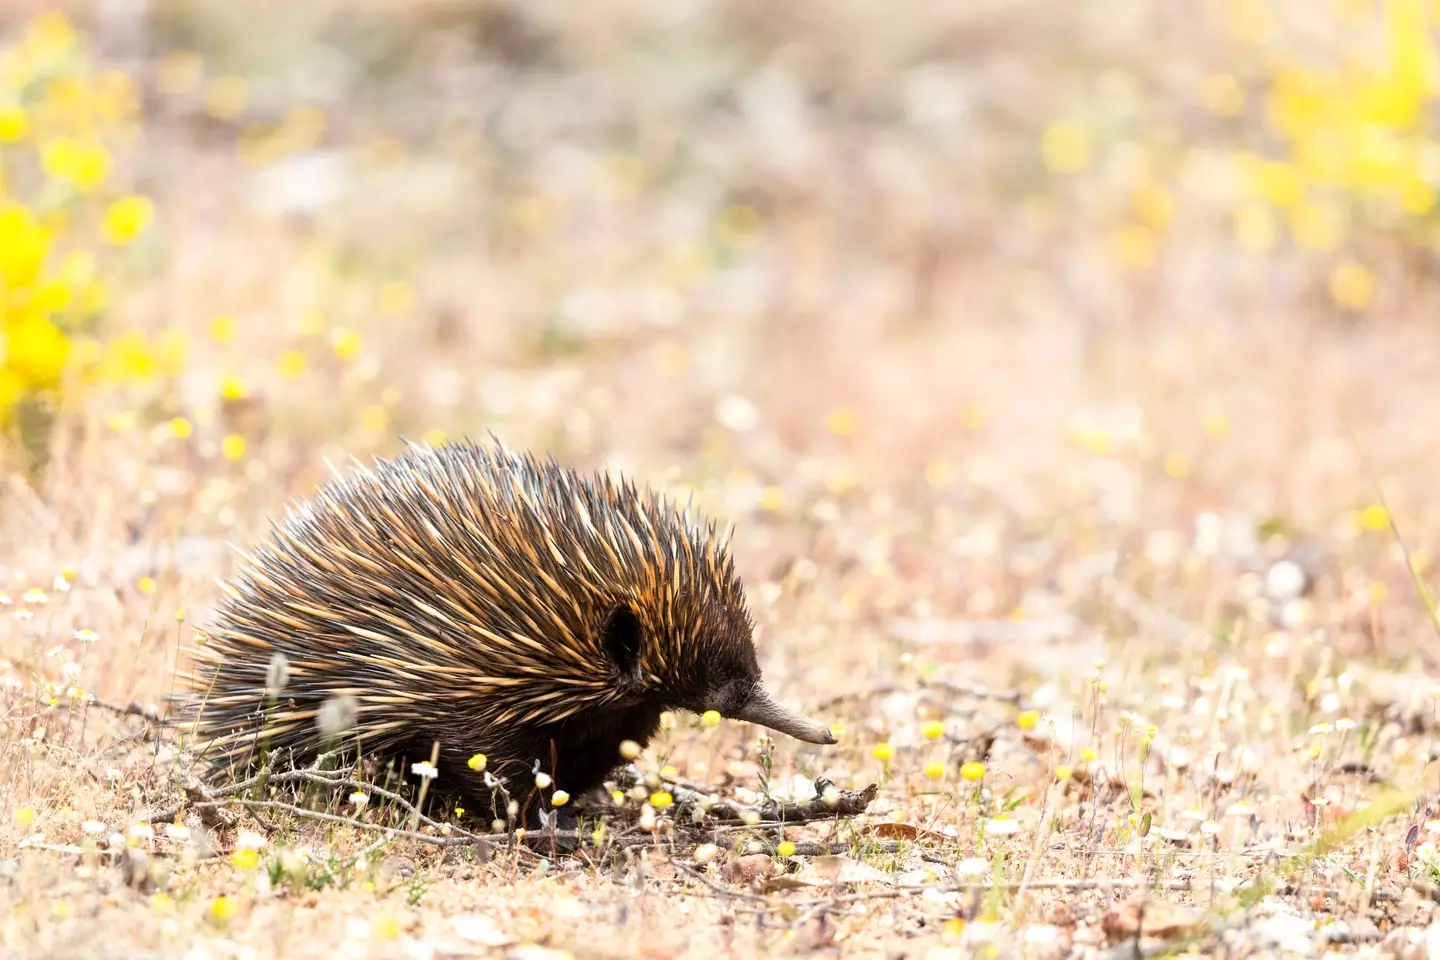 Echidnas very rarely make noises, and only while mating.